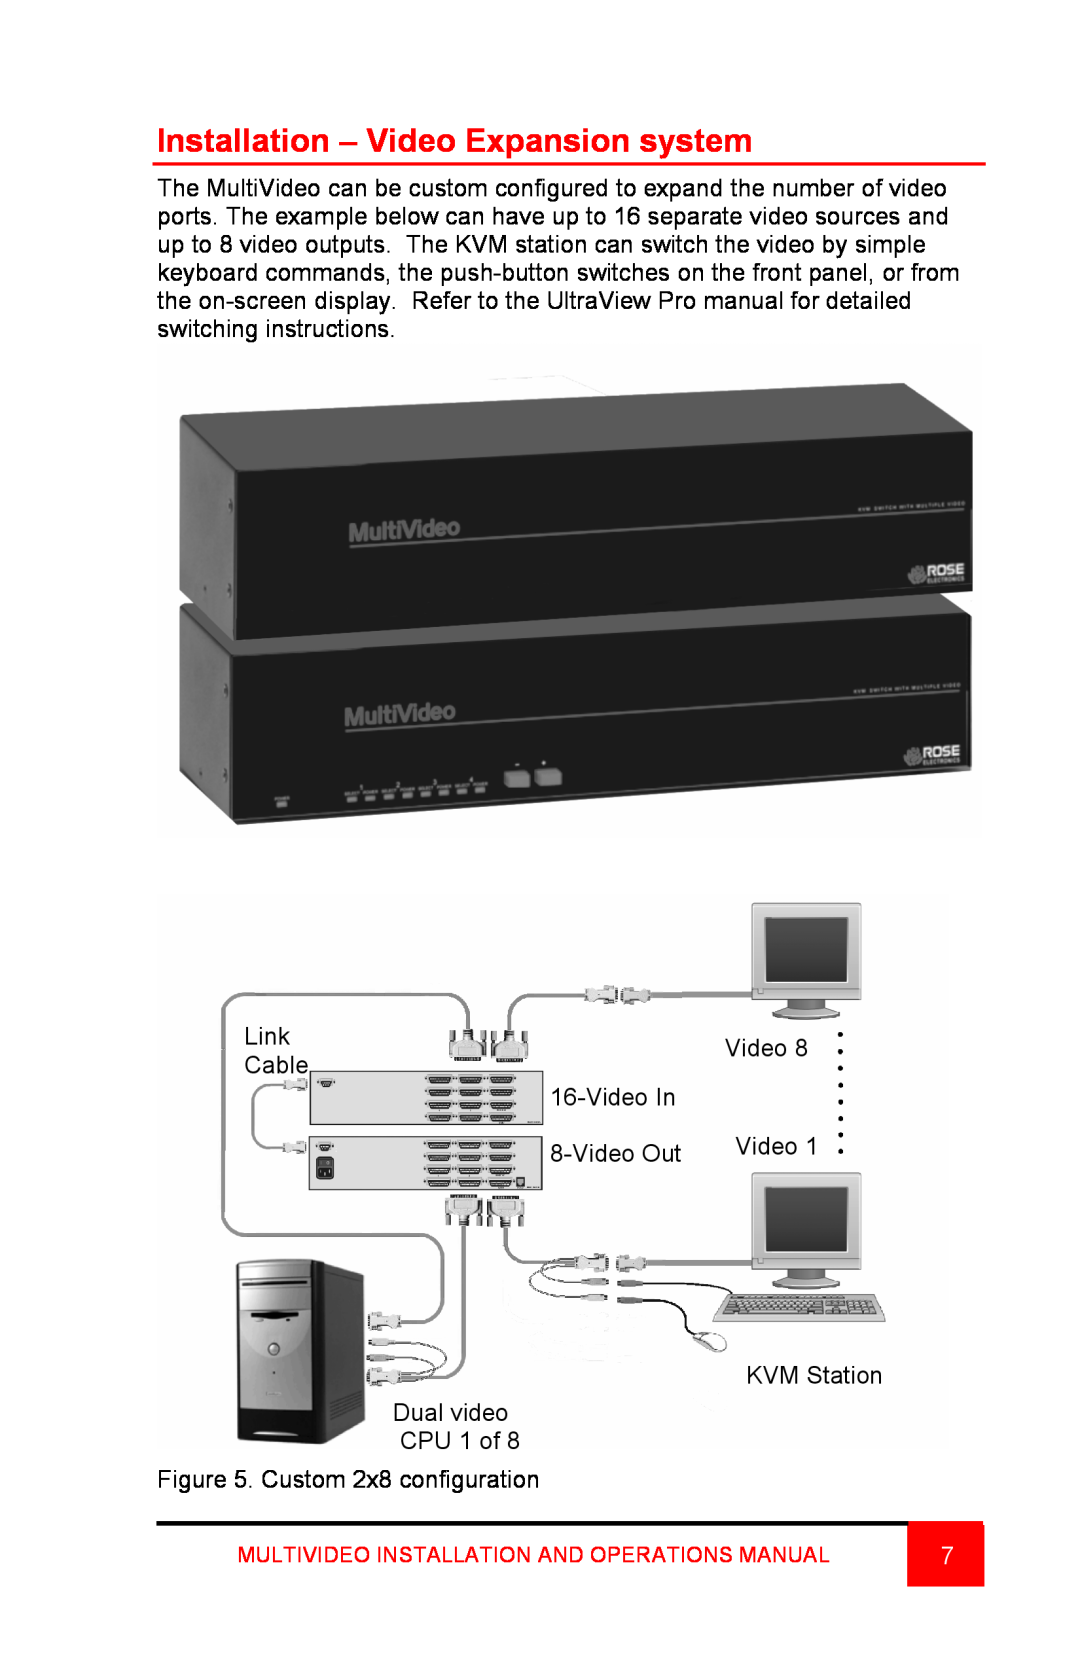 Rose electronic Video Easyware manual Installation - Video Expansion system 